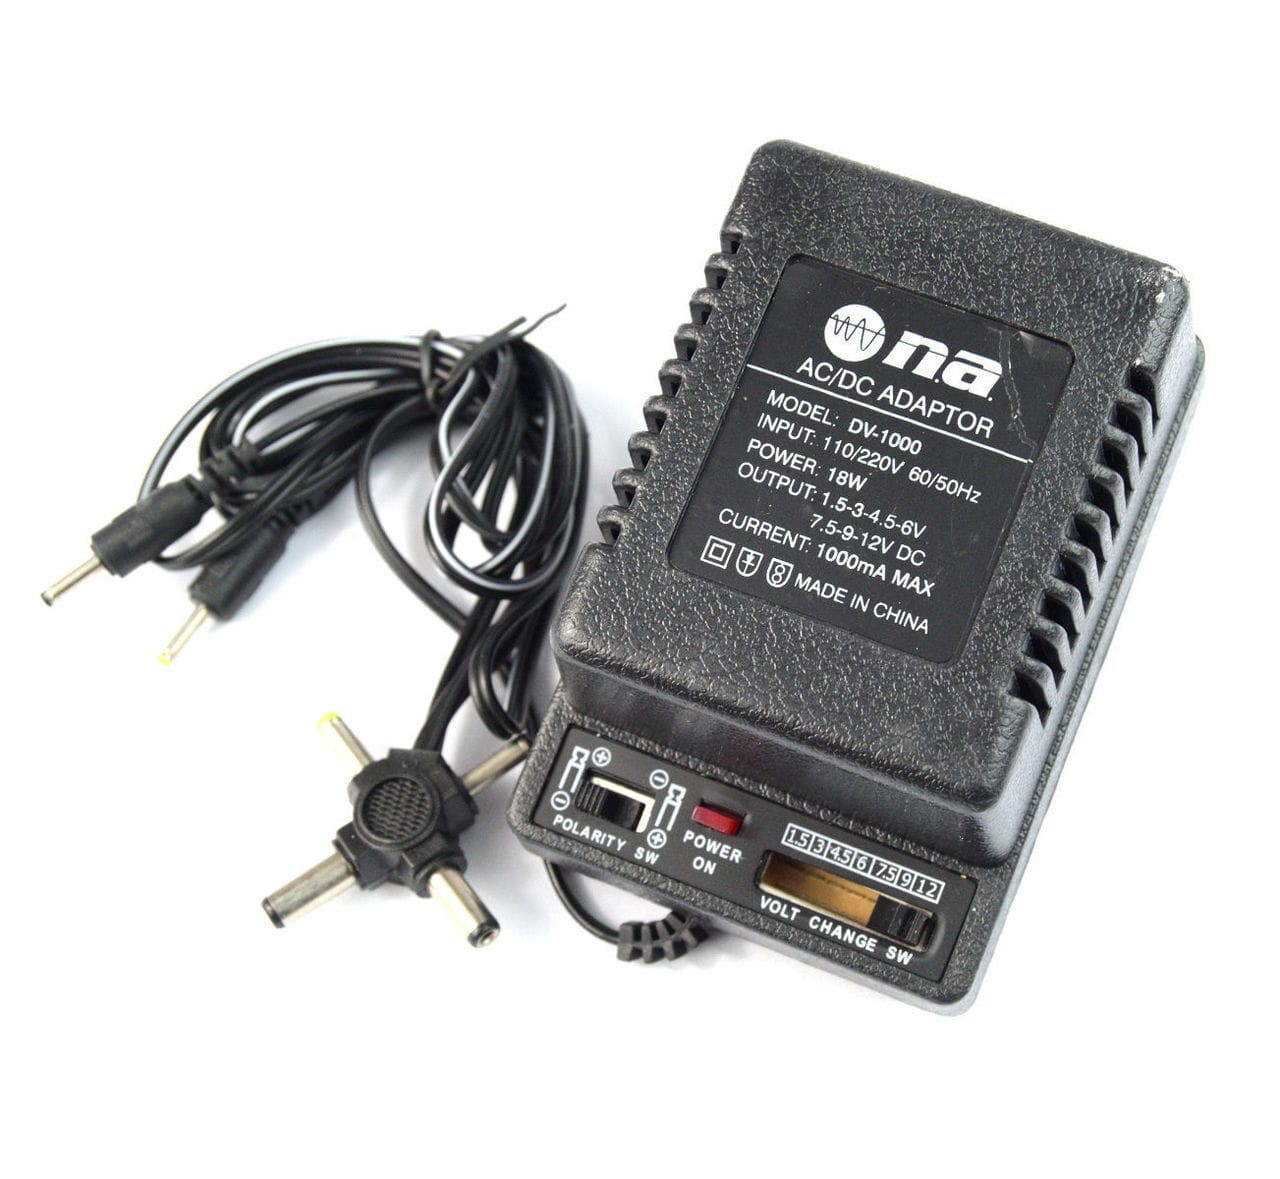 Nippon Universal AC/DC Adapter 1000mA Univeral AC/DC Adapter With 6 Tips From 1.5V To 12VDC .The universal 100 mA AC-DC adapter comes with 6 plugs-DV-1000